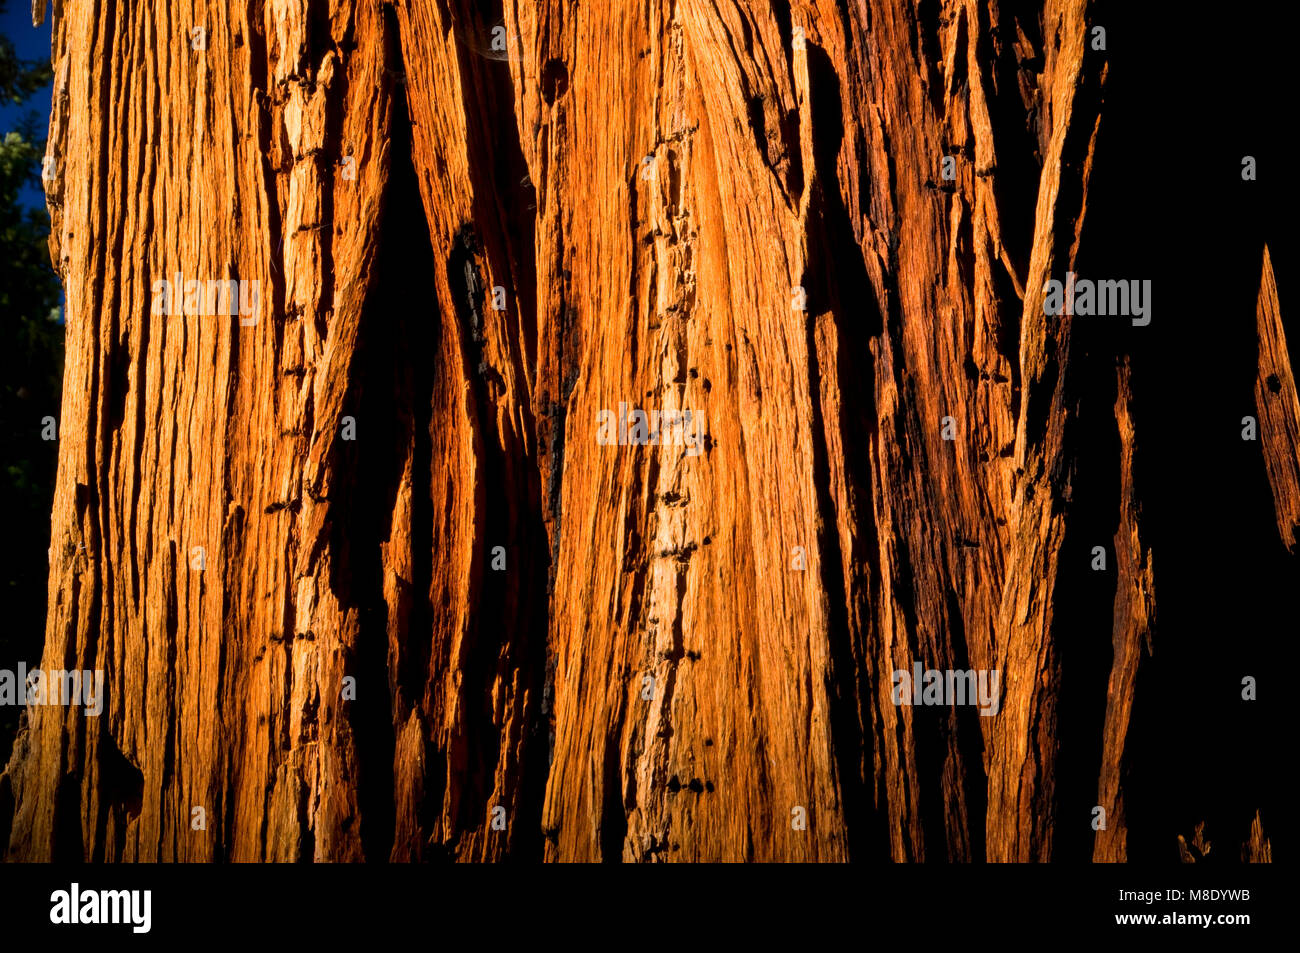 Cedar along Trail of 100 Giants at Long Meadow Grove, Sequoia National Monument, California Stock Photo